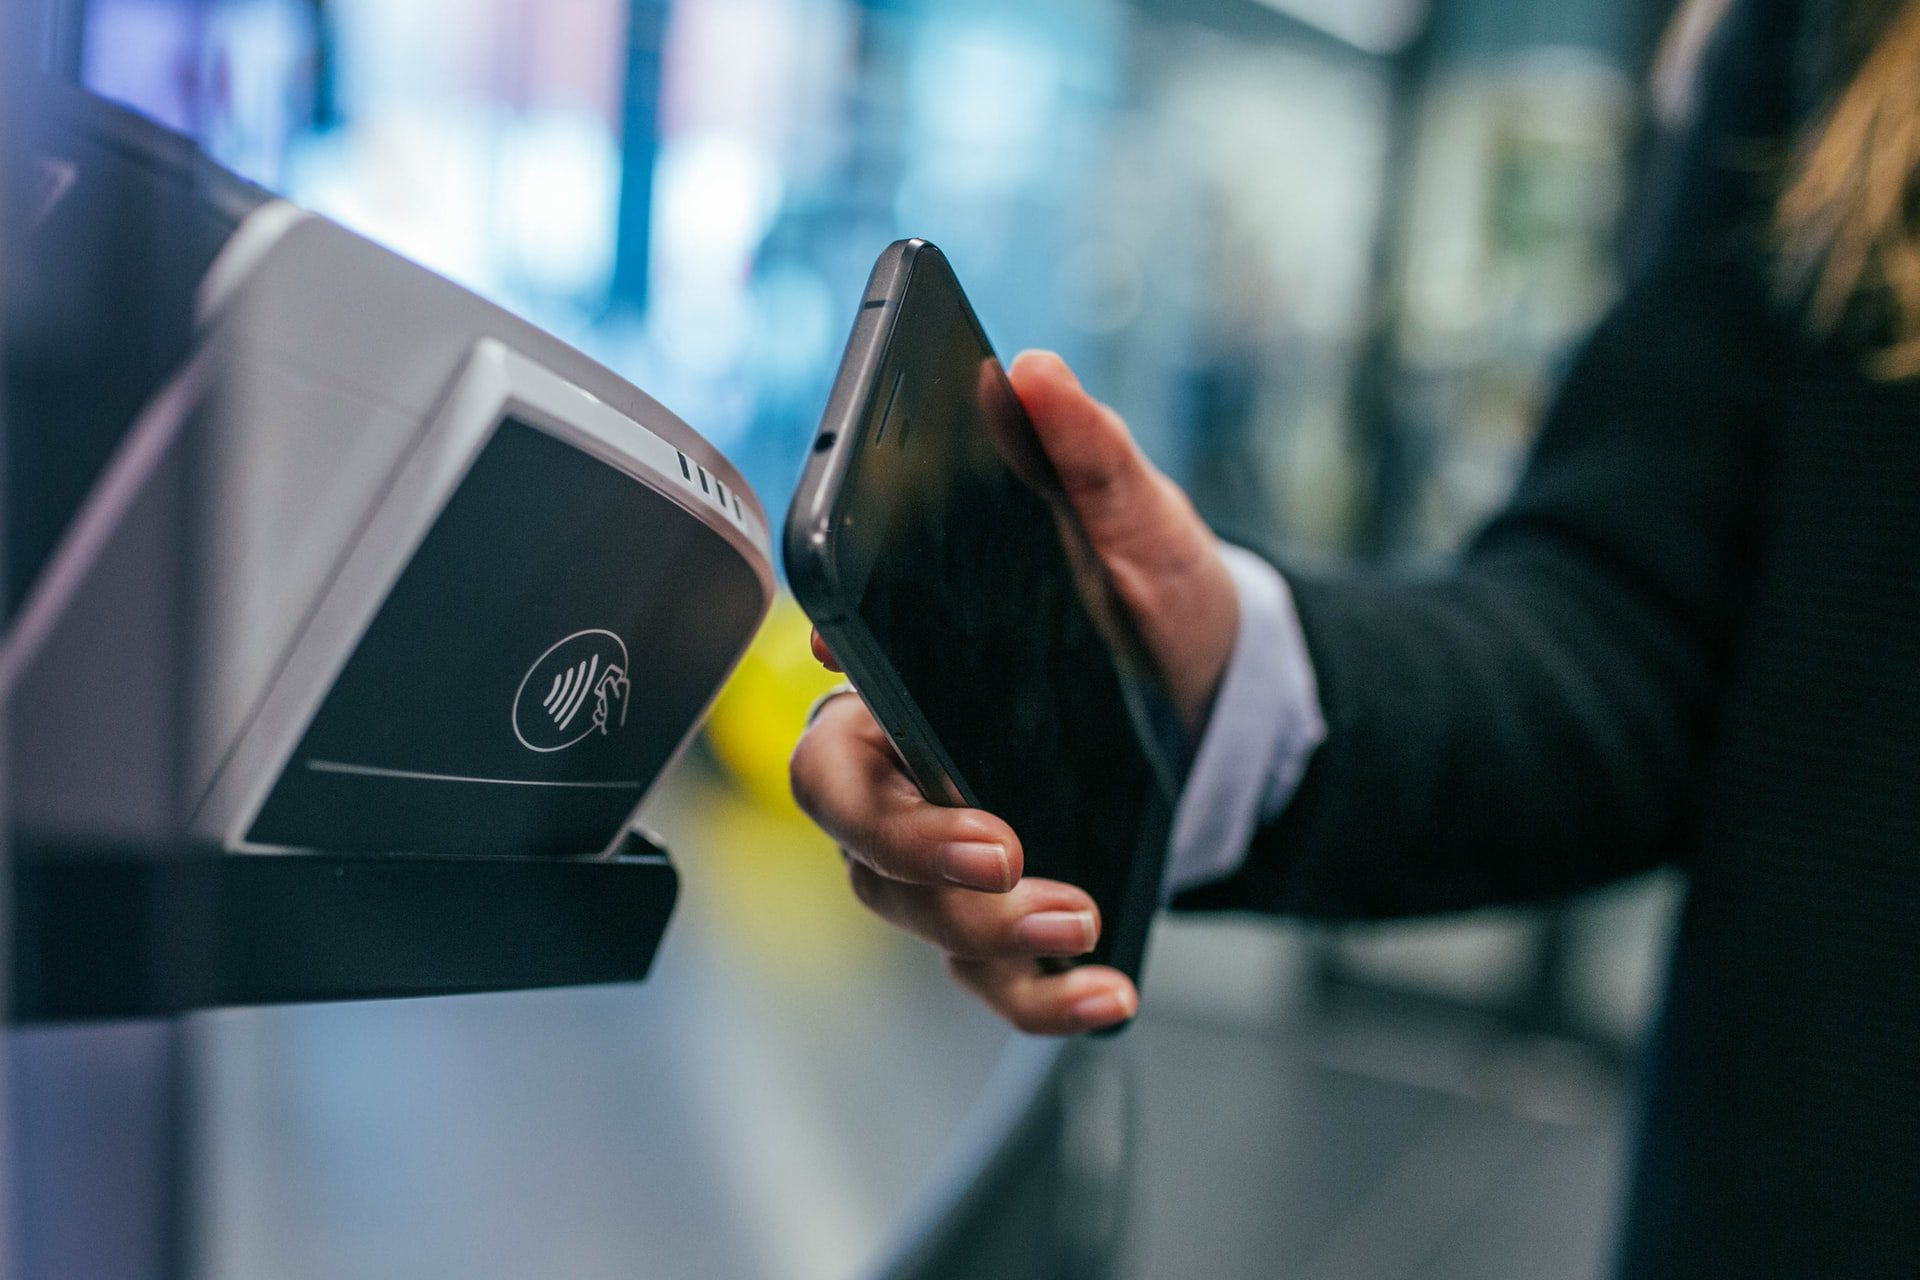 Contactless payments will be a focus for companies when they start traveling again.